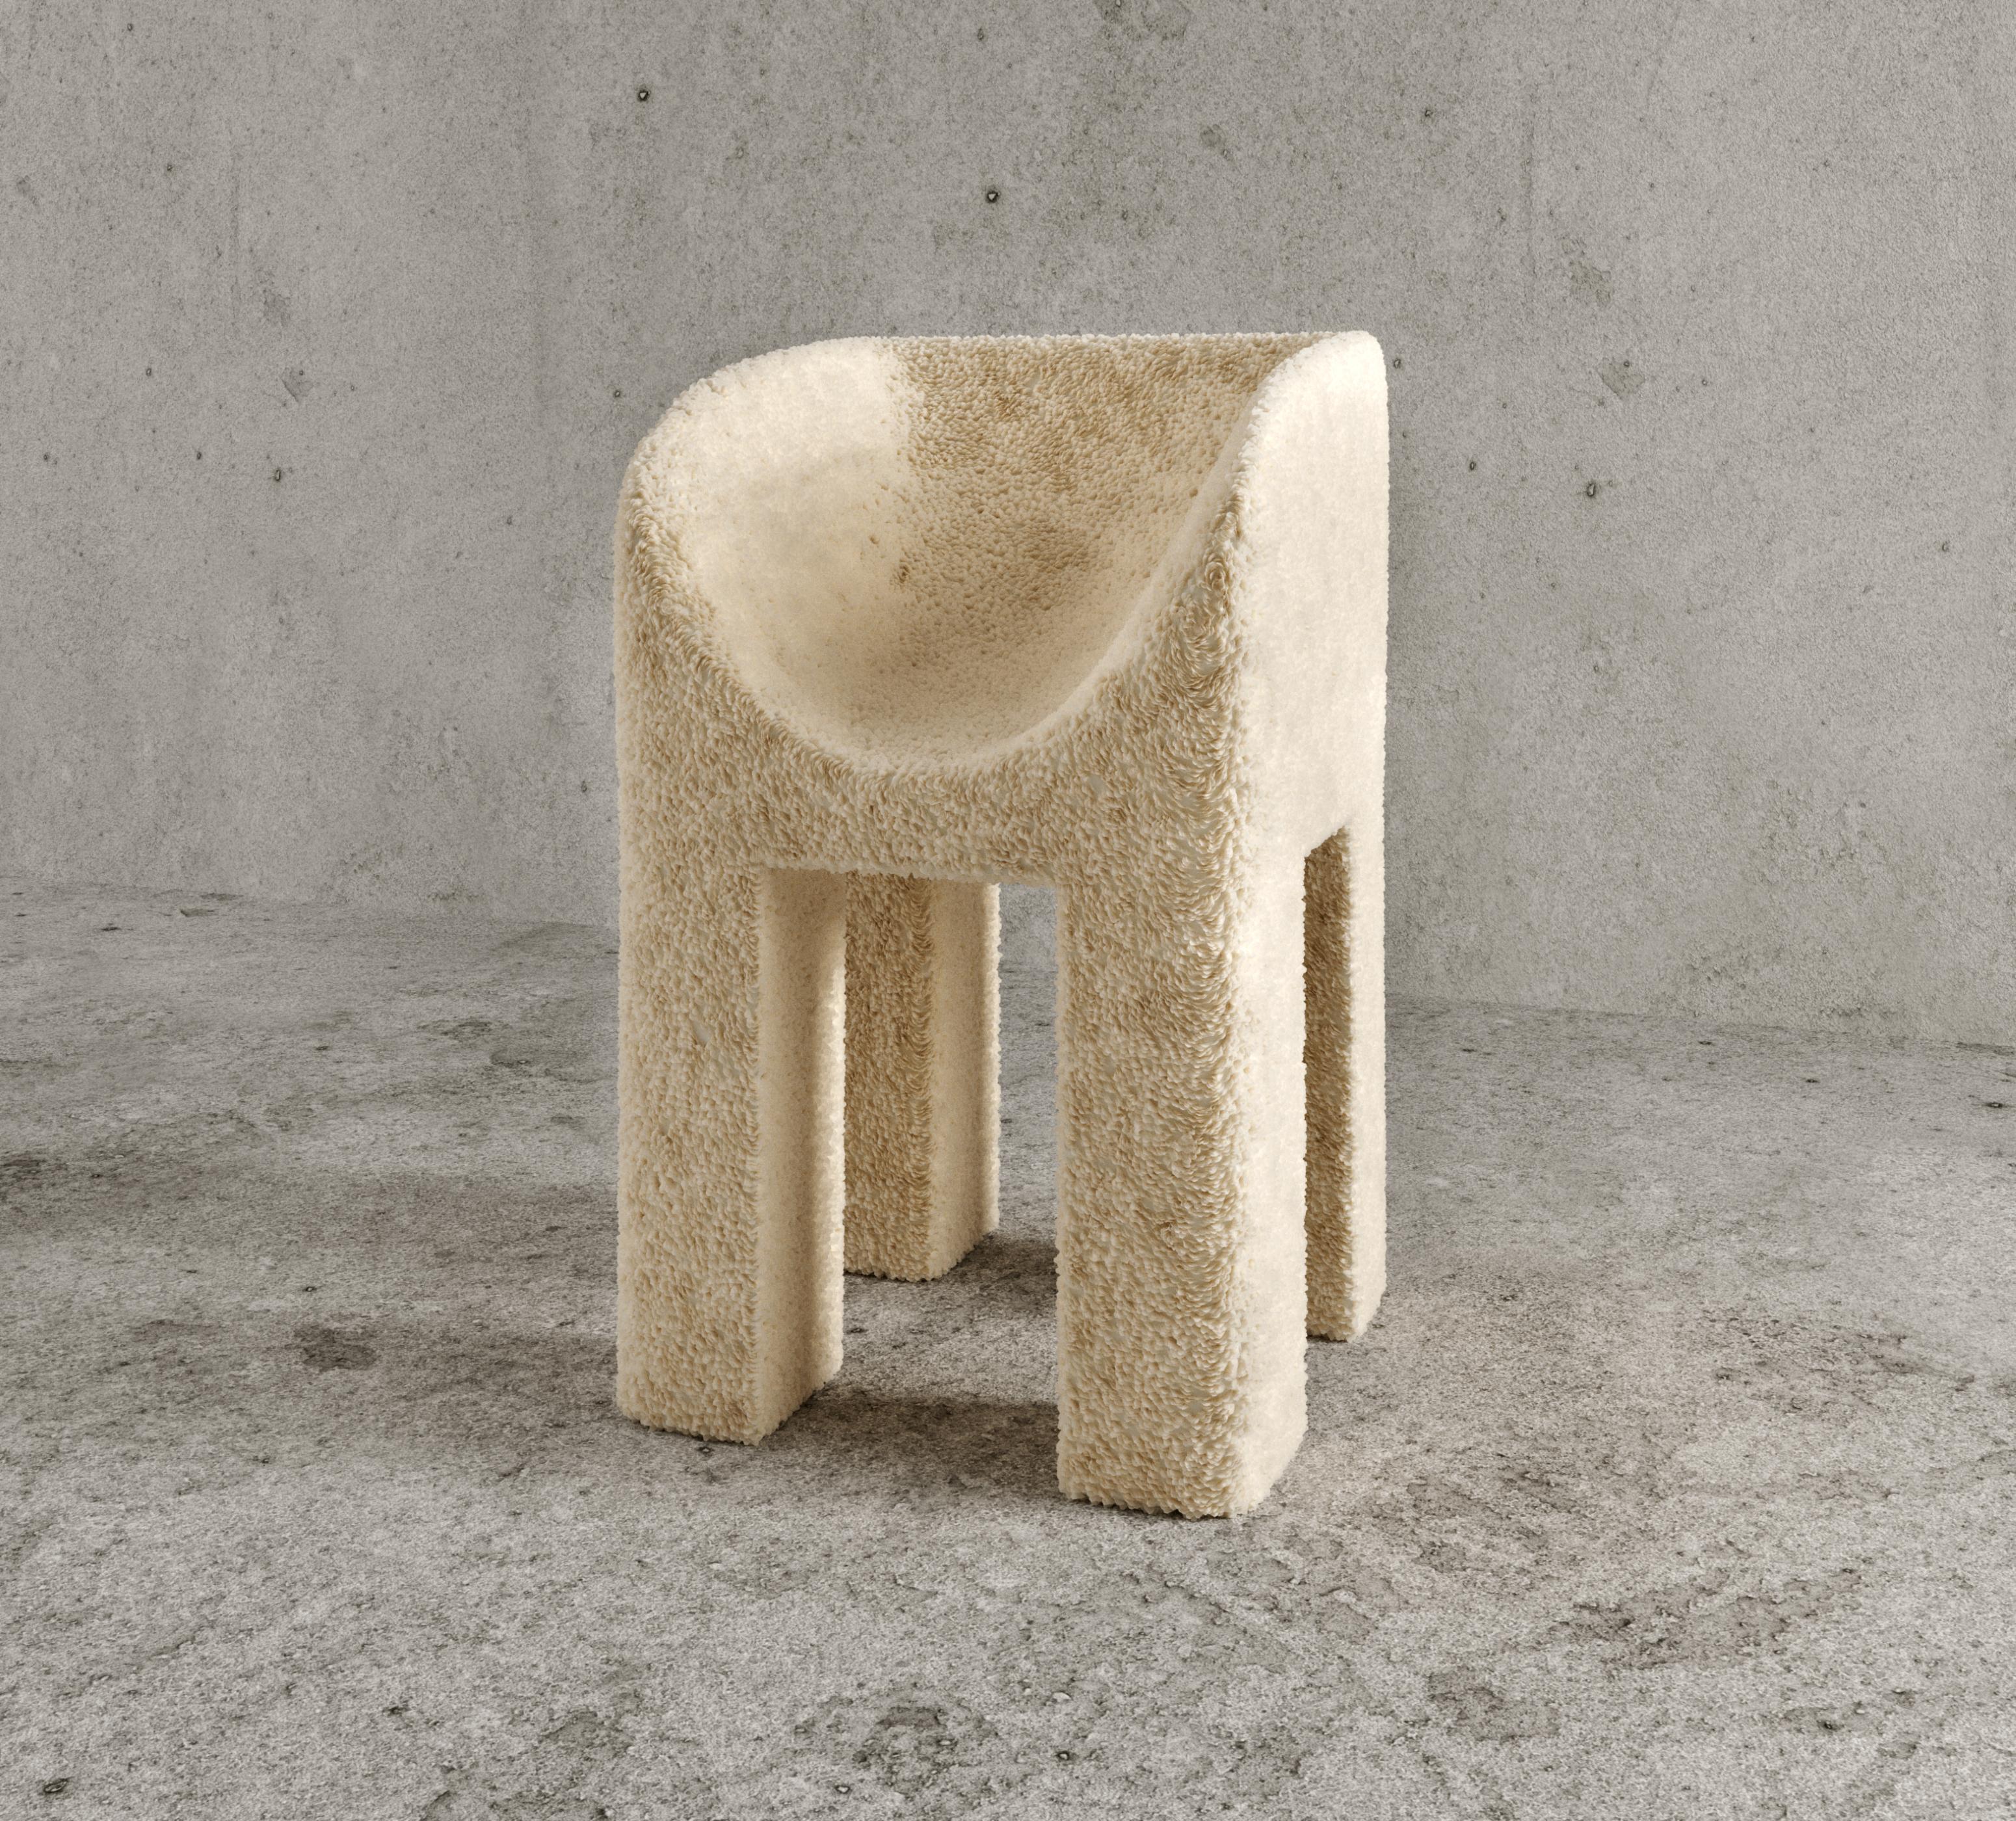 The Pilar chair is a work of art. Inspired by the shapes found in ancient greek architecture, this contemporary chair is hand-crafted with plush, polythene foam padding and faux fur upholstery. Use The Pilar chair at your desk, dining table or as a